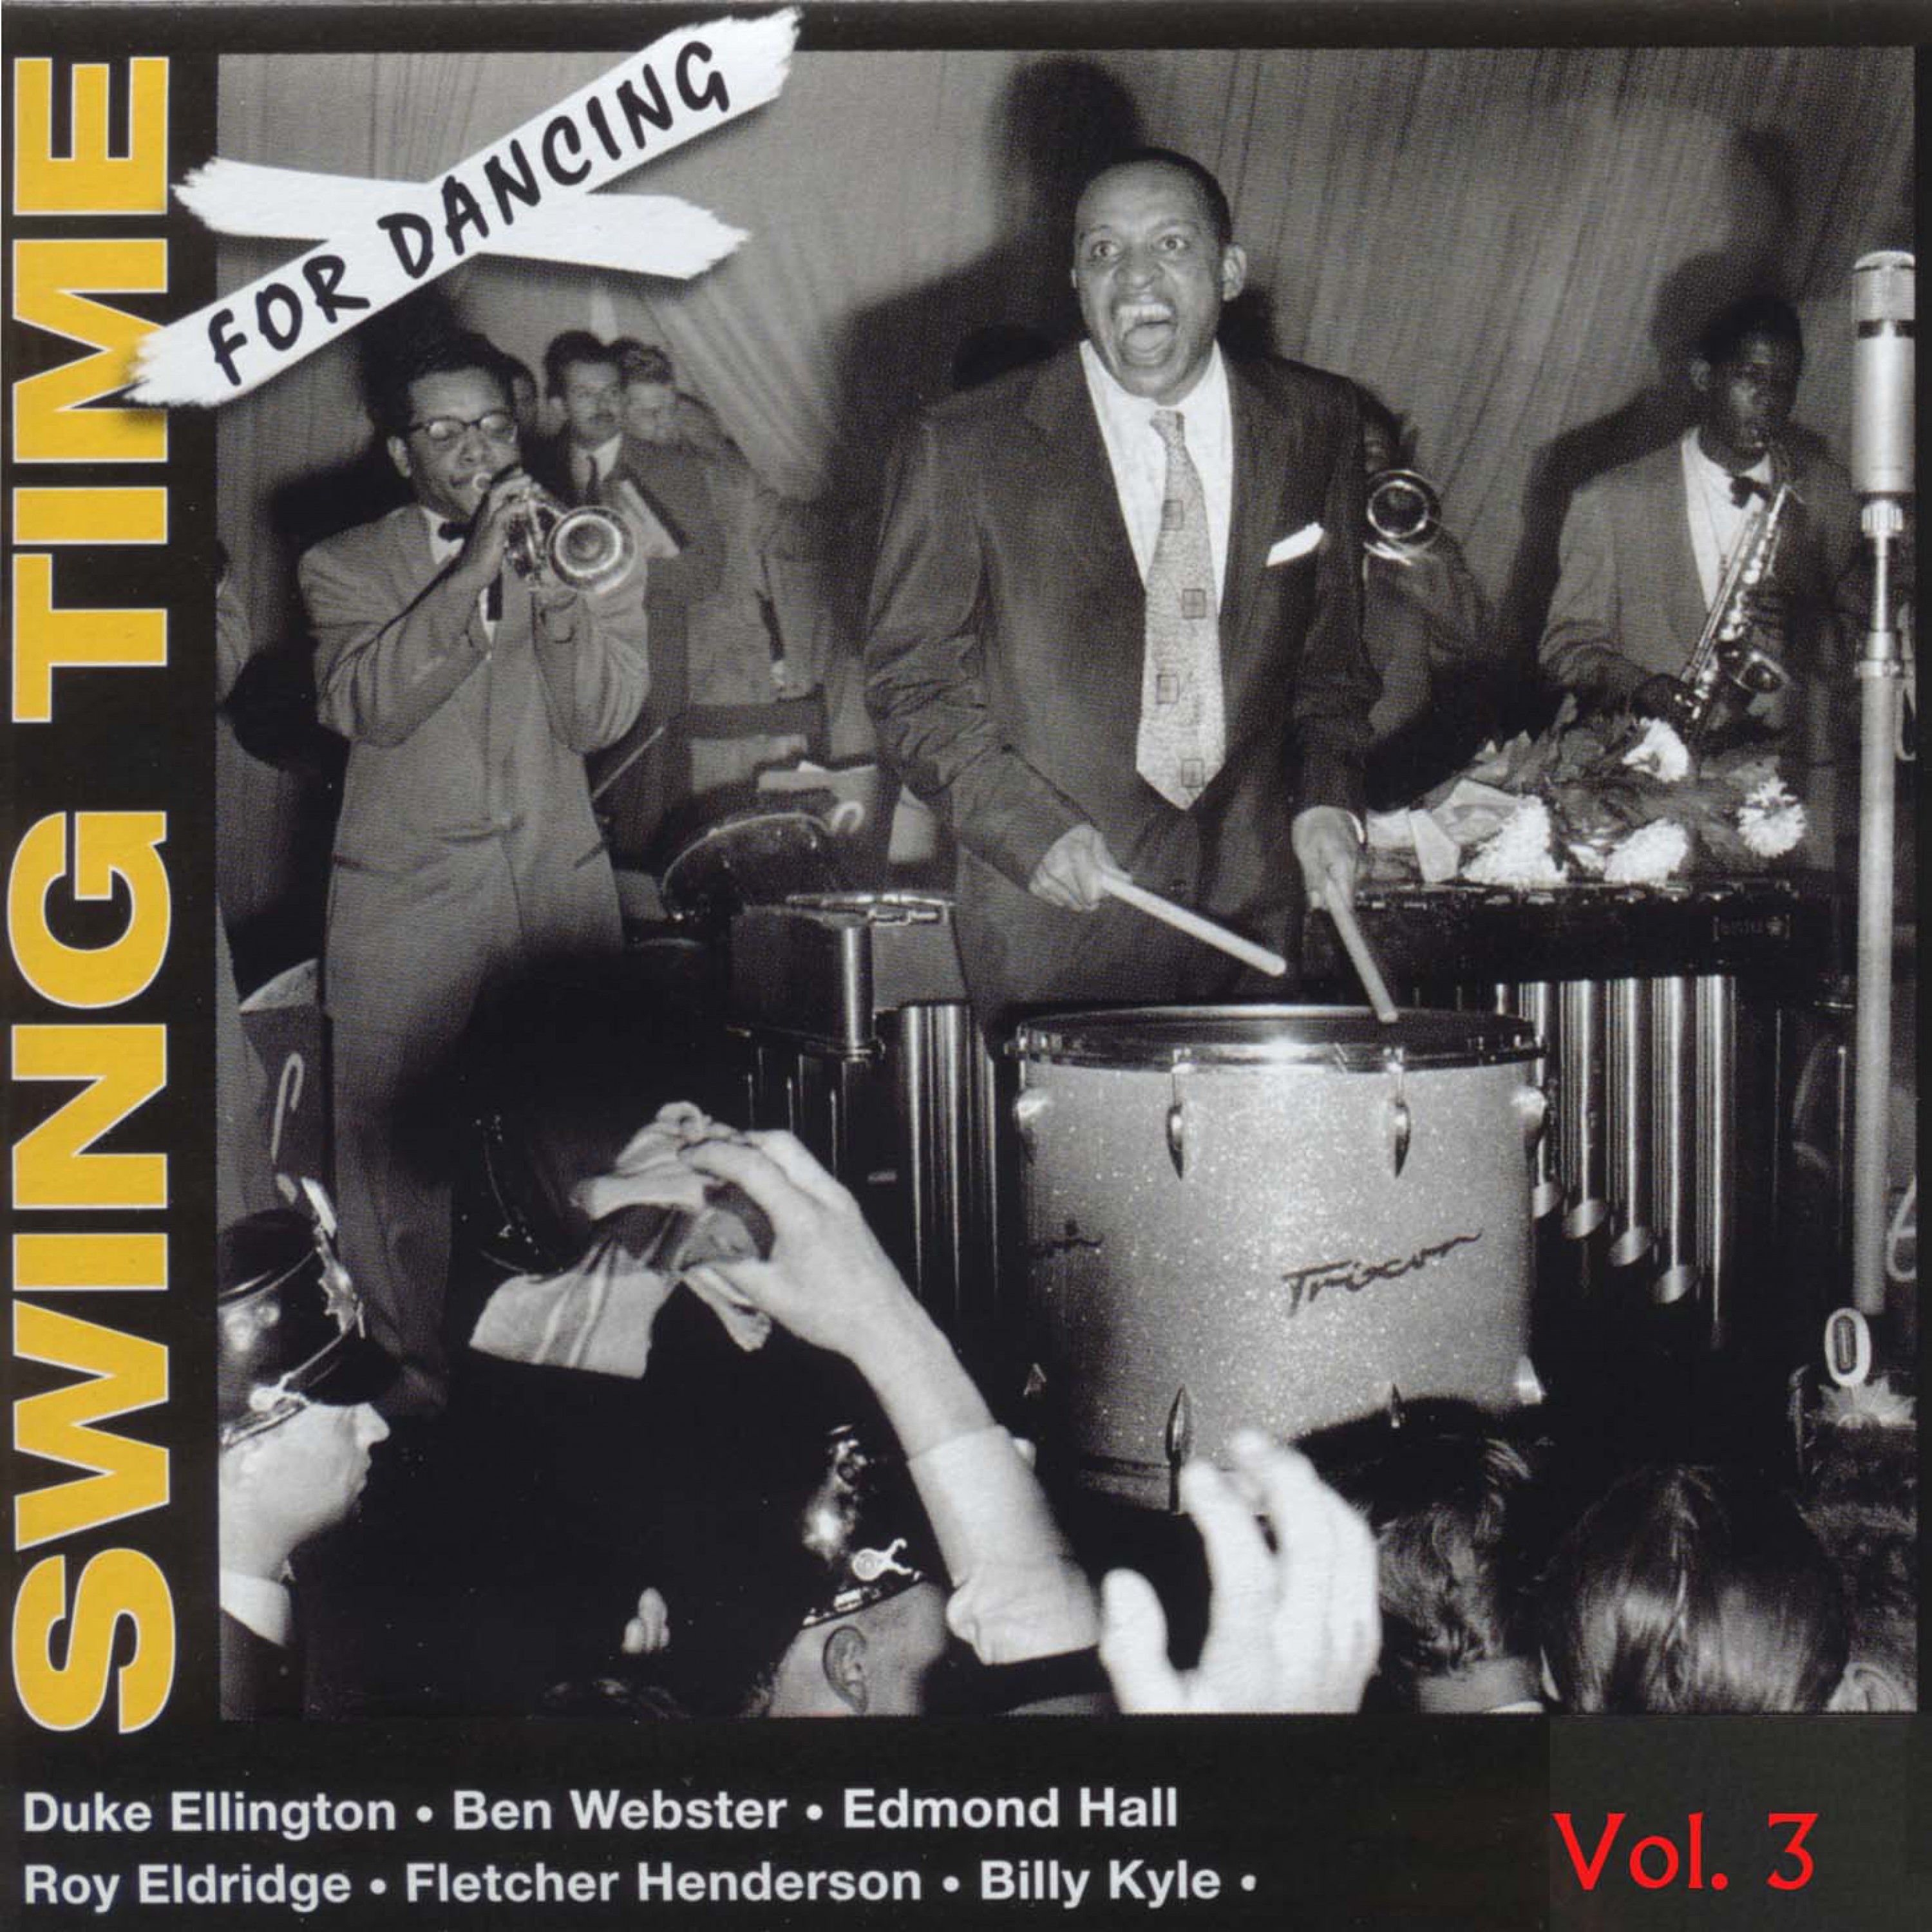 Swing Time for Dancing Vol. 3